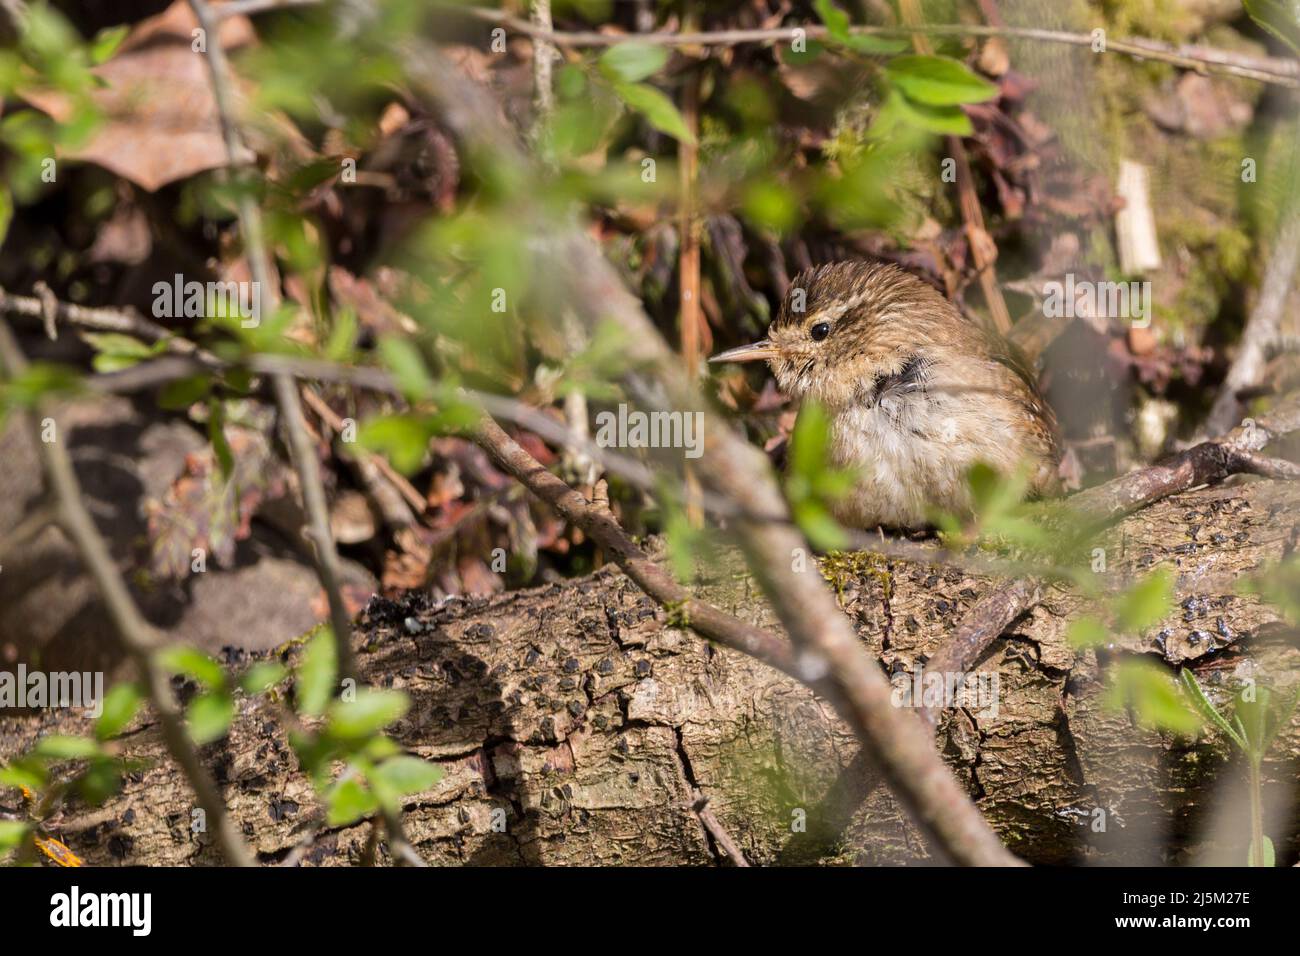 Wren resting (troglodytes troglodytes) small brown bird with barring on plumage, has fine pointed bill perched on log under cover of foliage to preen Stock Photo